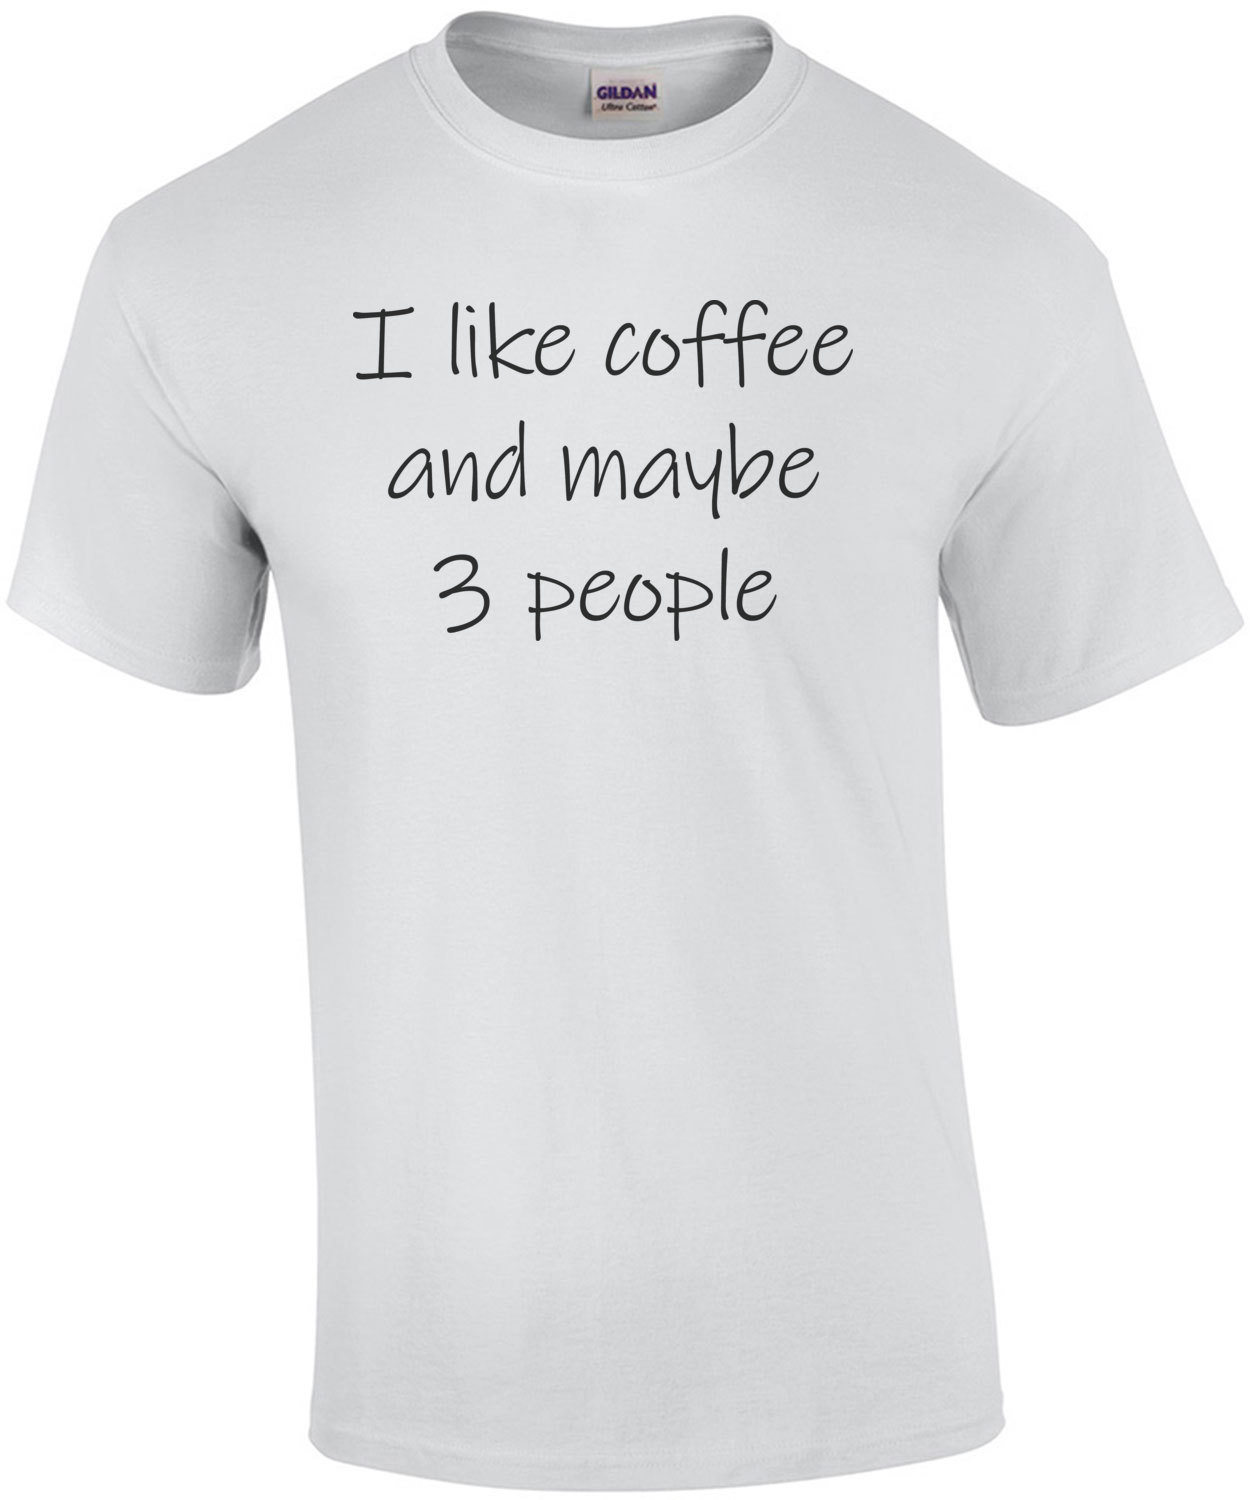 I like coffee and maybe 3 people - funny coffee t-shirt